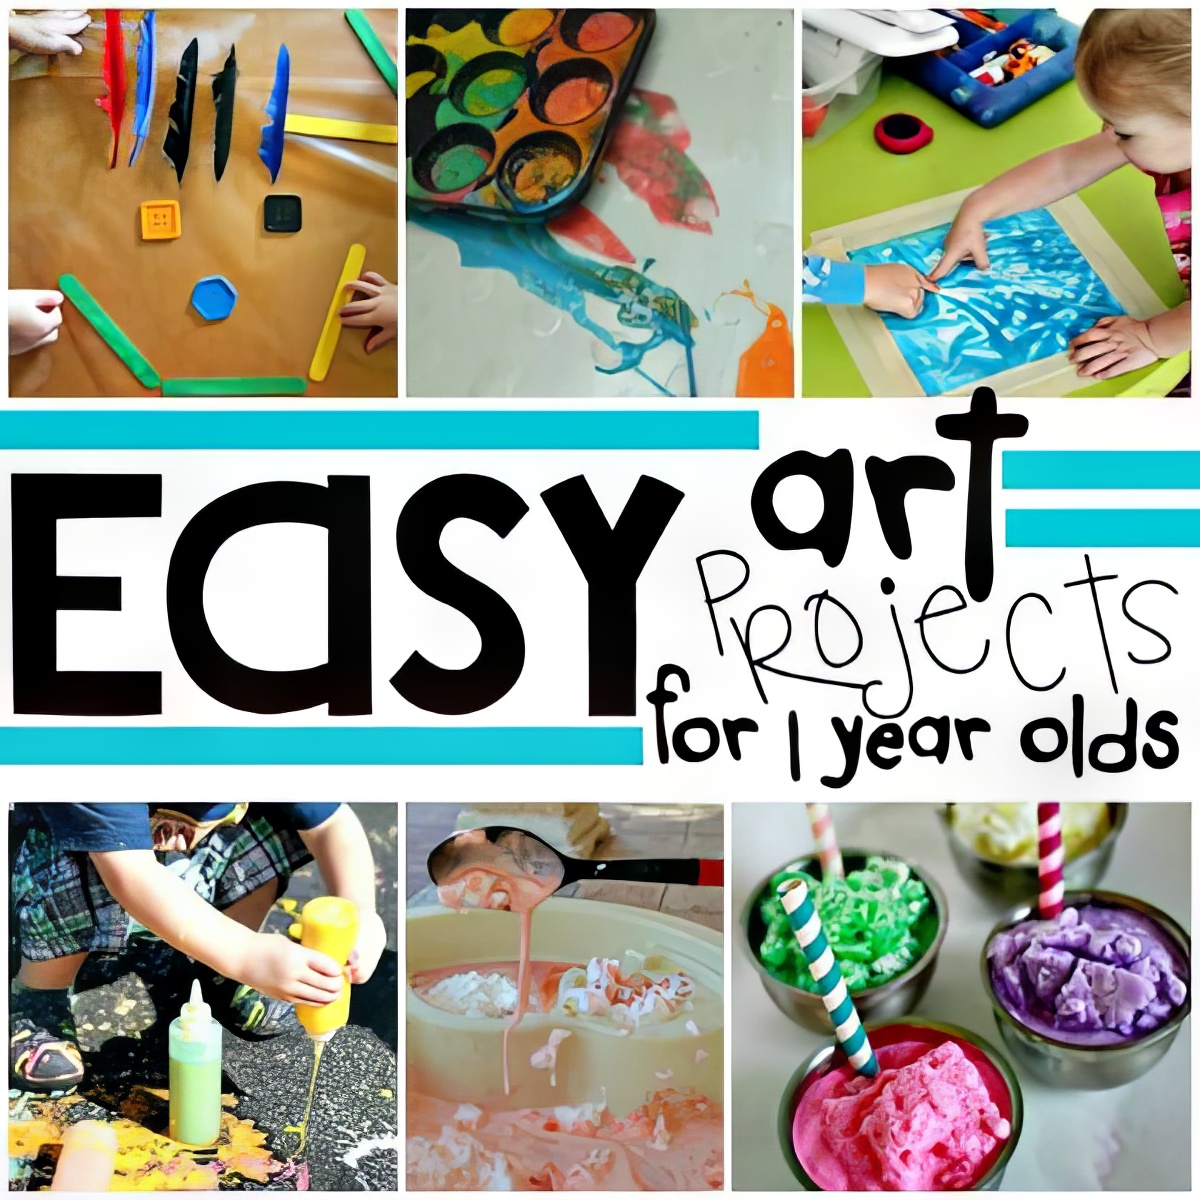 Create these fun and easy art projects with your little ones this weekend!